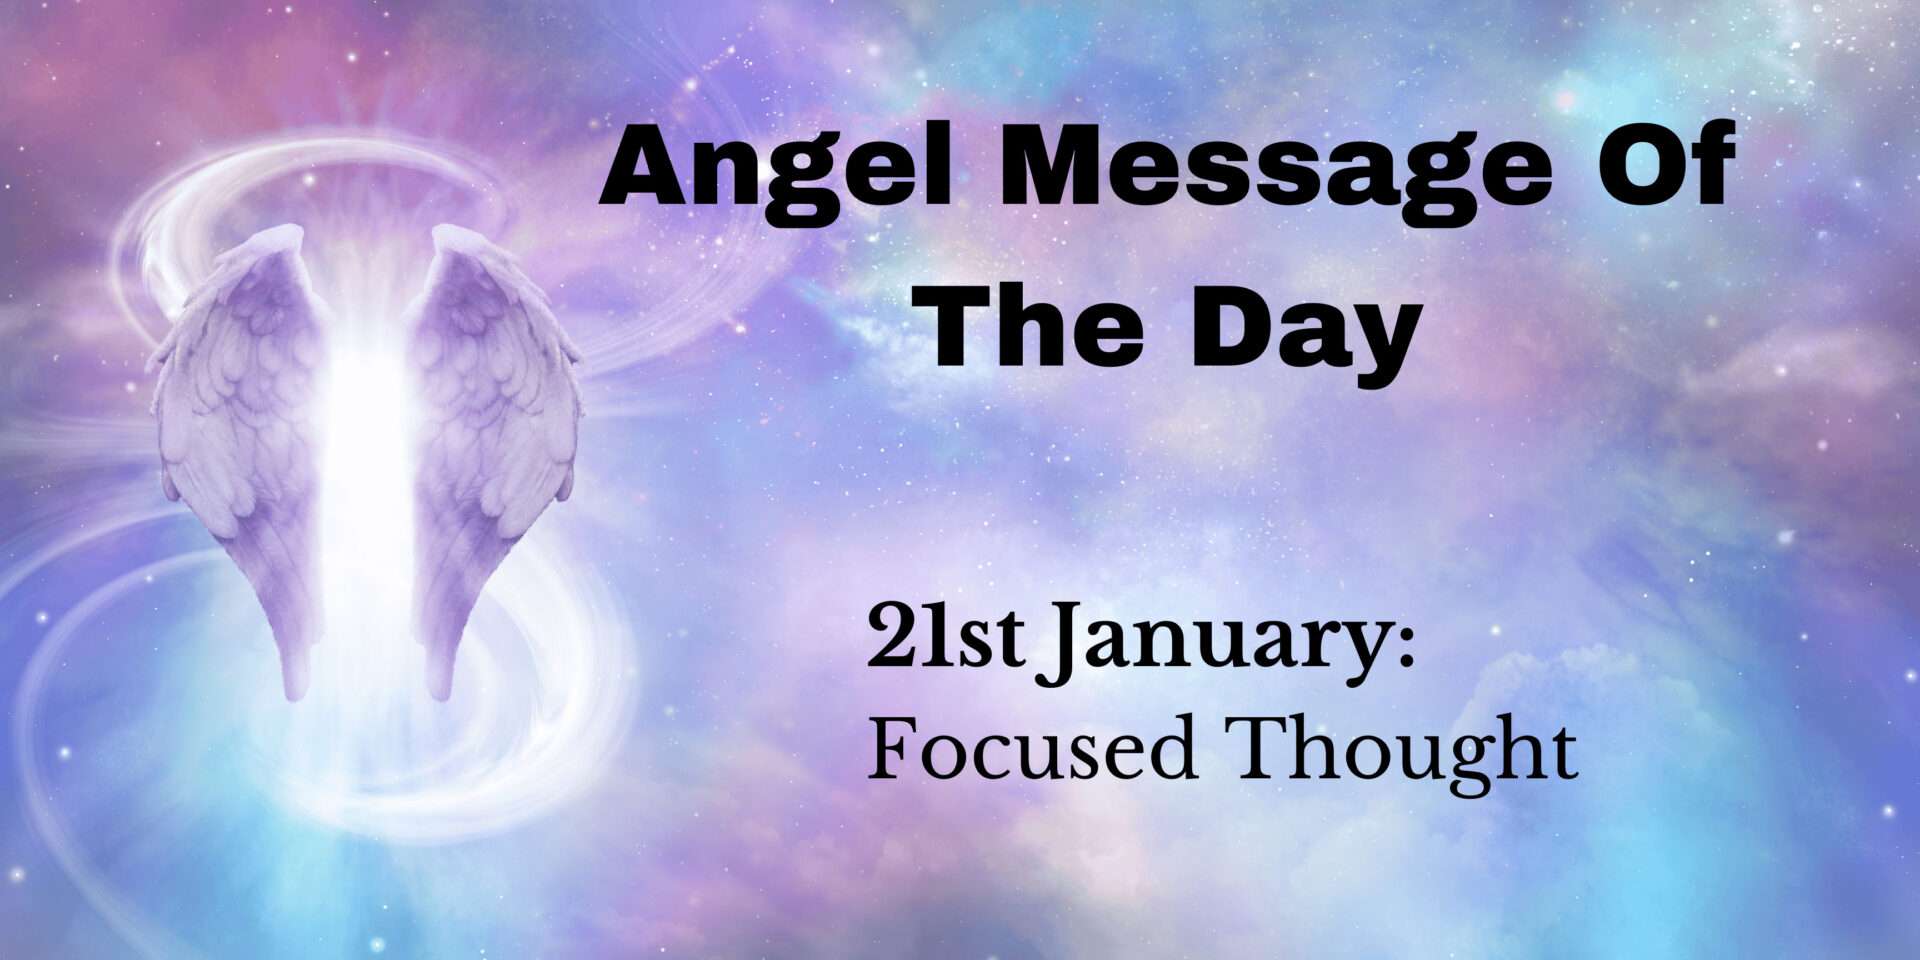 angel message of the day : focused thought